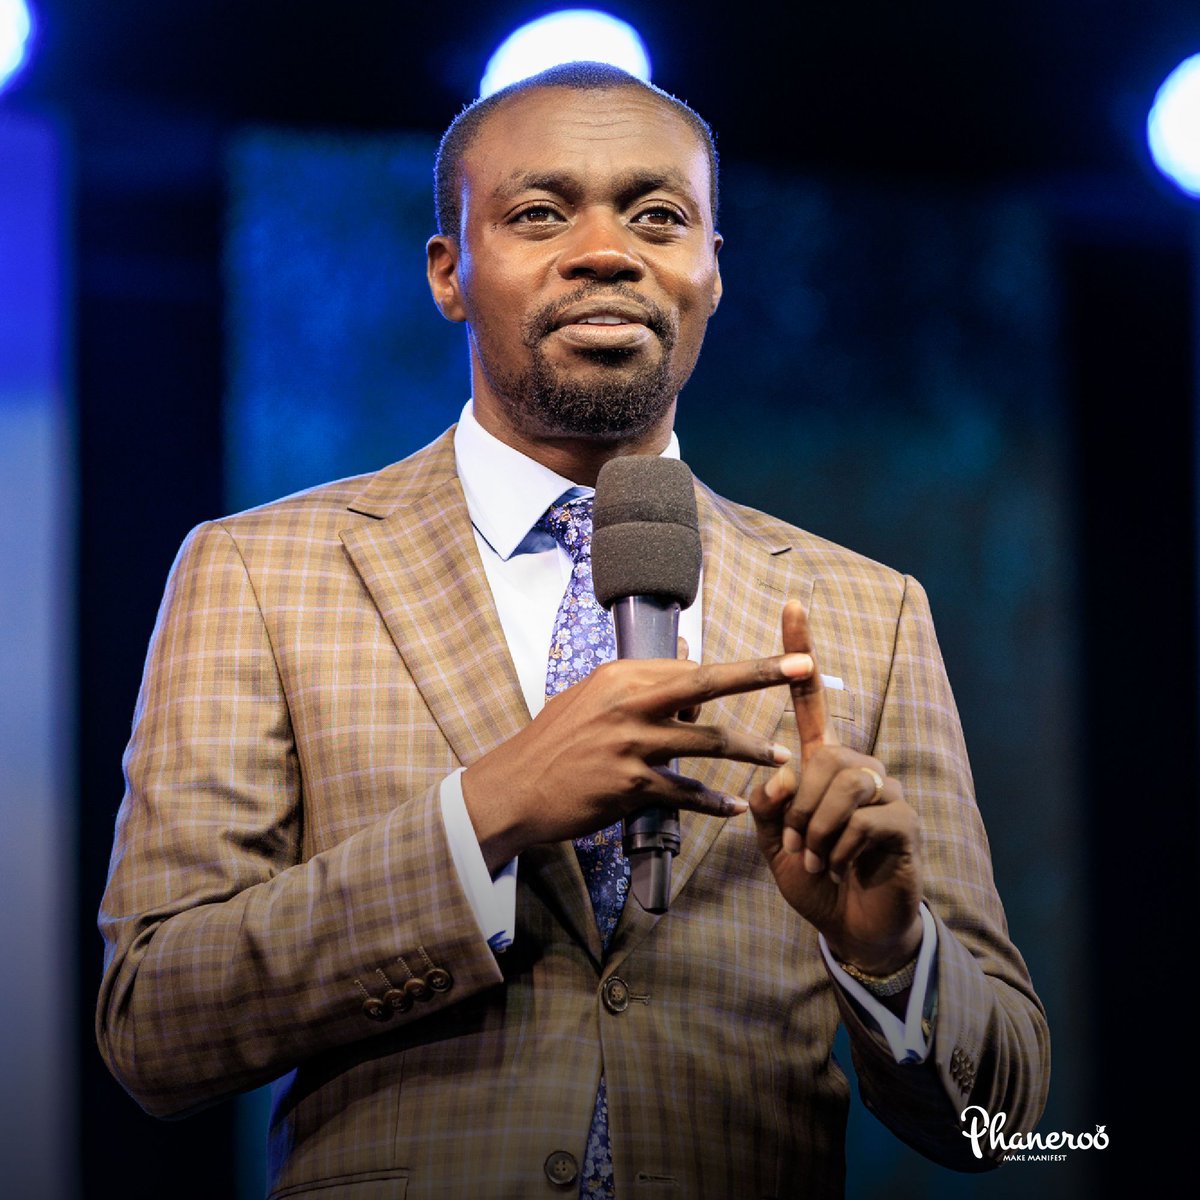 Every believer has been called to live and walk in the glory and manifest presence of God. This is the covering that keeps you from ALL evil. SELAH bit.ly/TheCommandingP… #TheCommandingPresence #Phaneroo